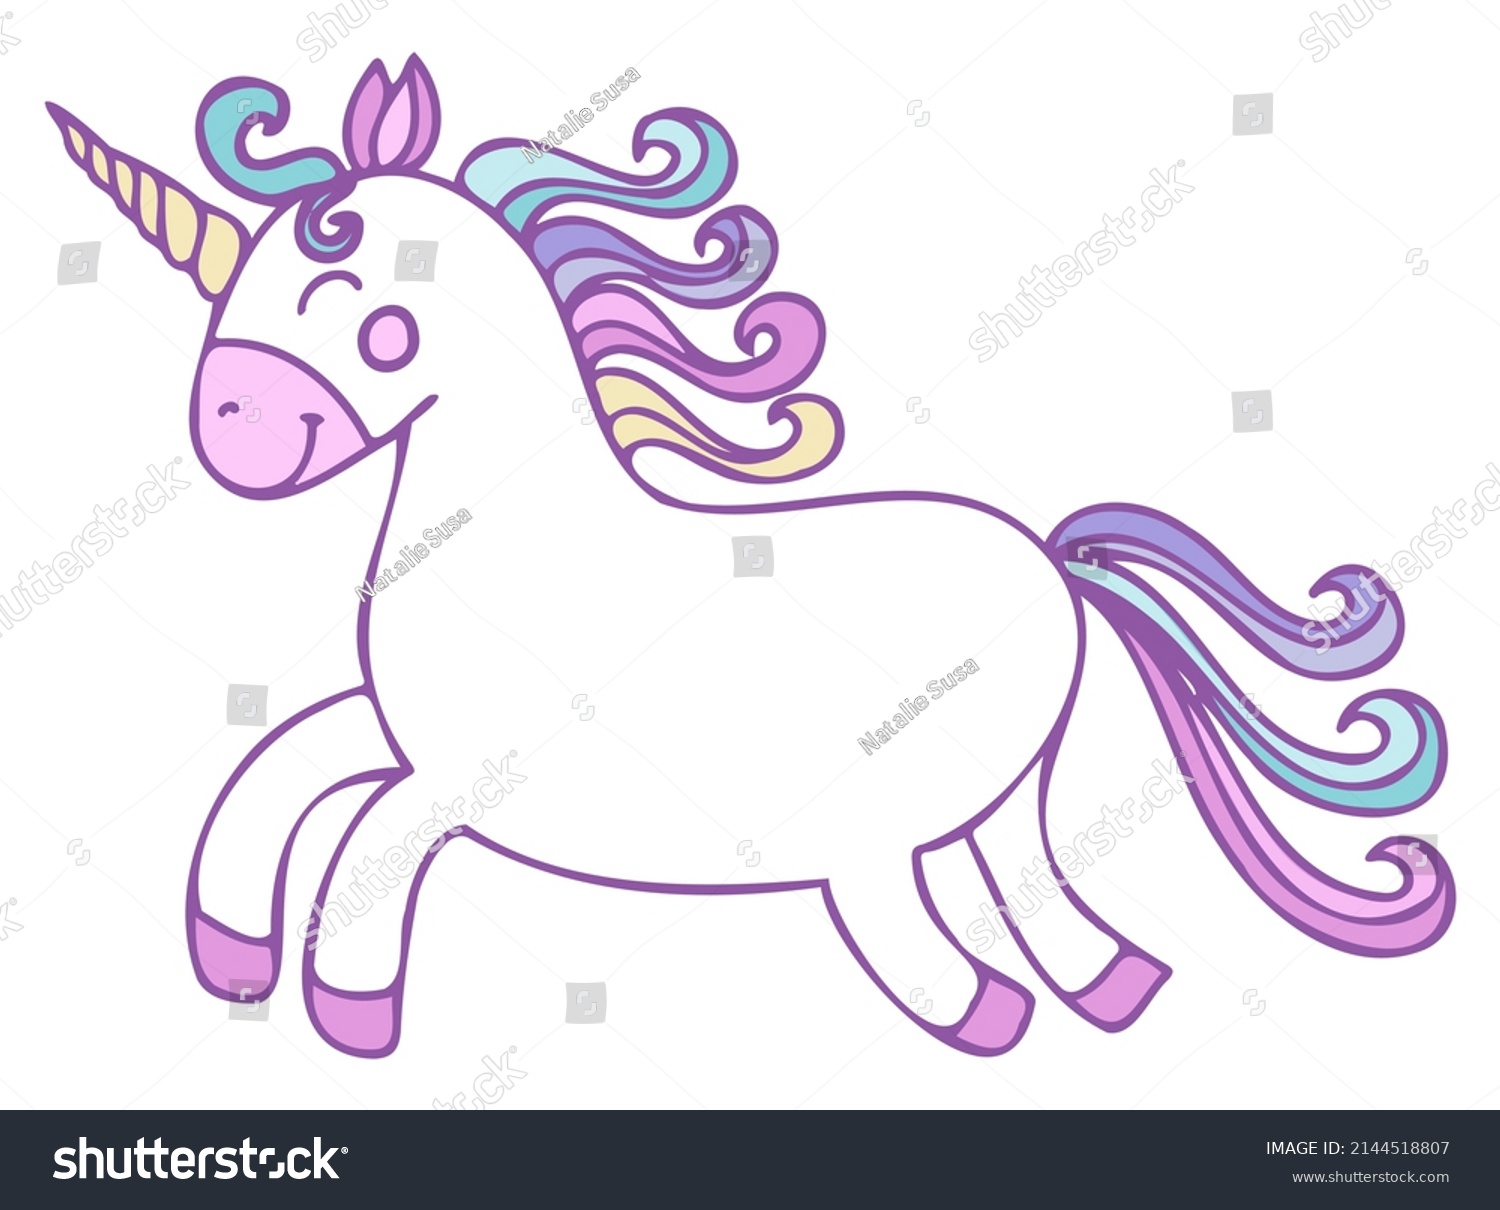 SVG of Cute unicorn with colorful mane.Cartoon style vector illustration isolated on white background.
Suitable for nursery and post card design and svg for cricut svg